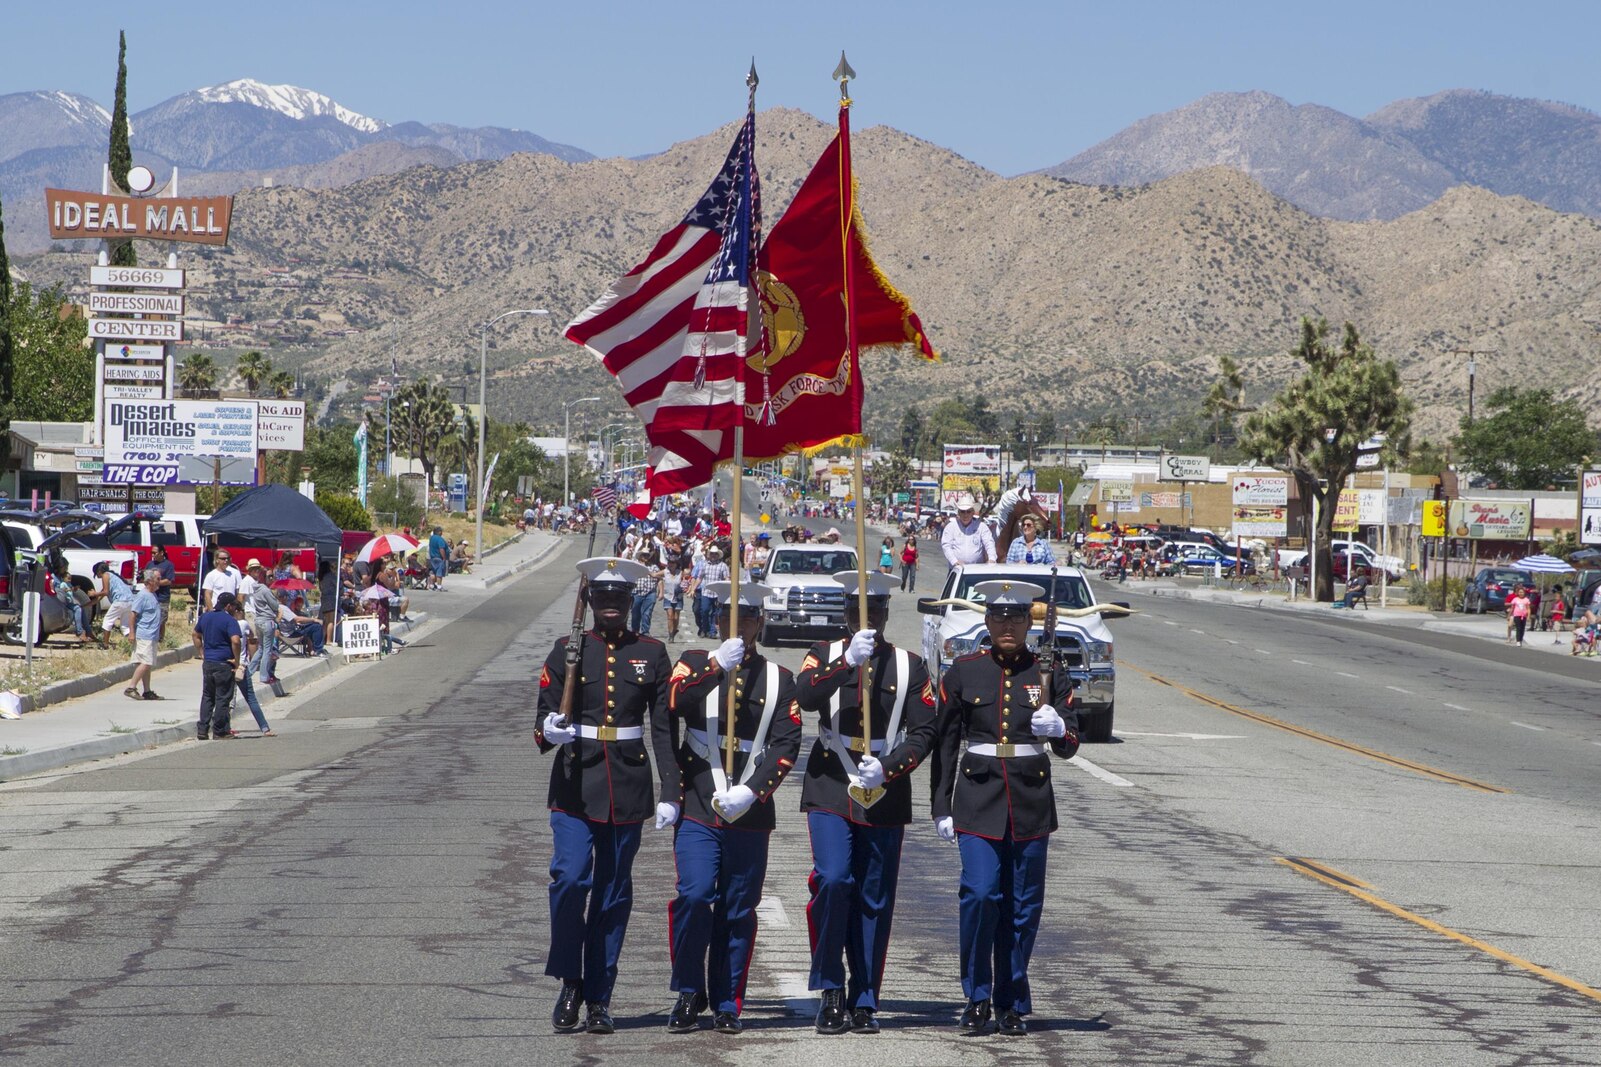 The Combat Center Color Guard leads the parade during the 67th annual Grubstake Days Parade along California Highway 62 in Yucca Valley, California.